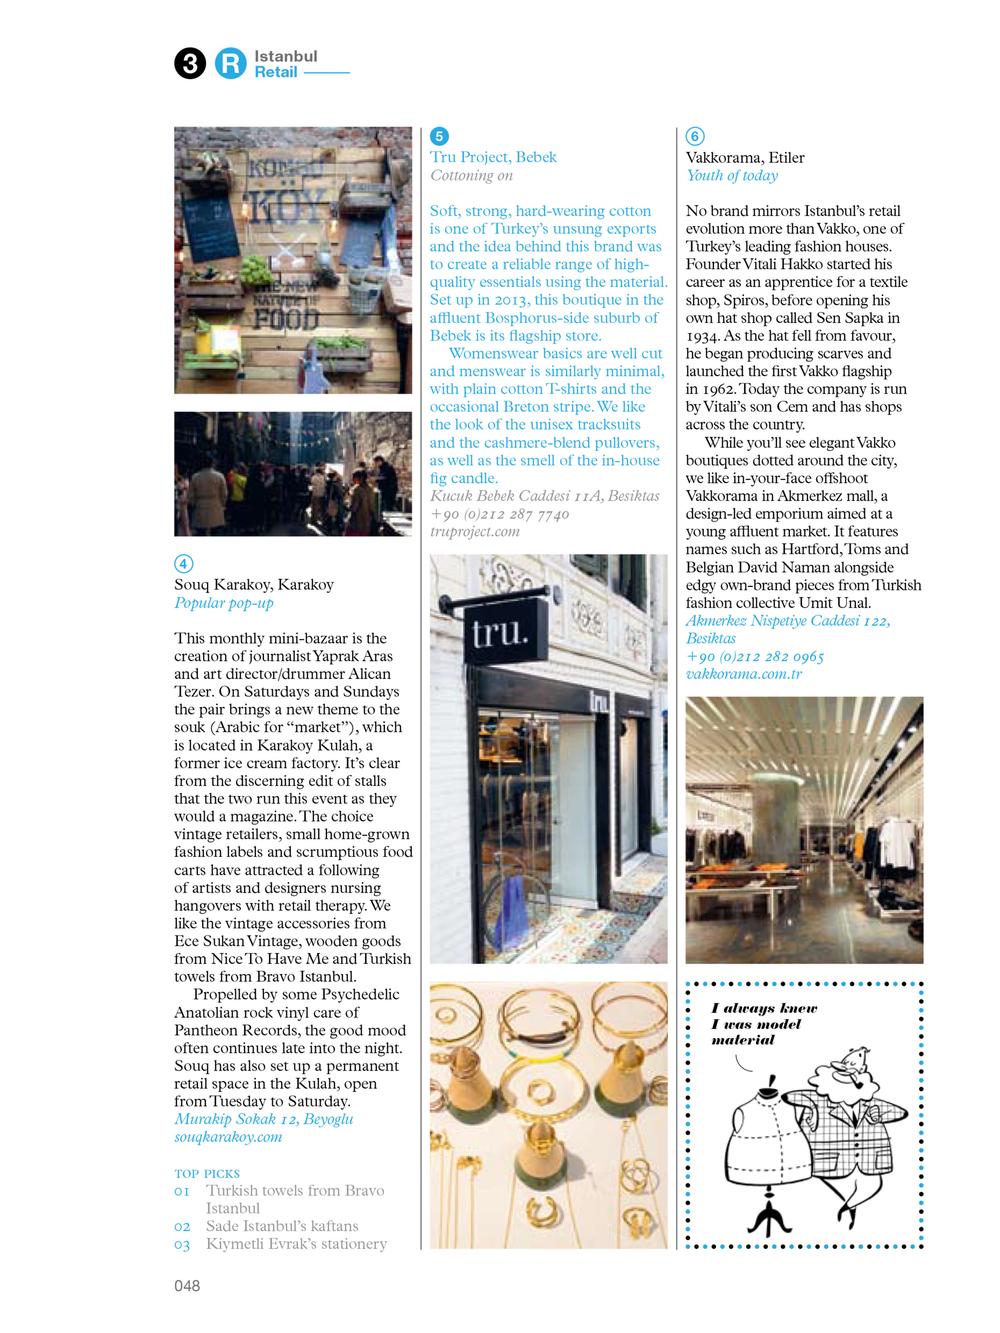 lifestyle - THE MONOCLE - Travel Guide to Istanbul - PLENTY